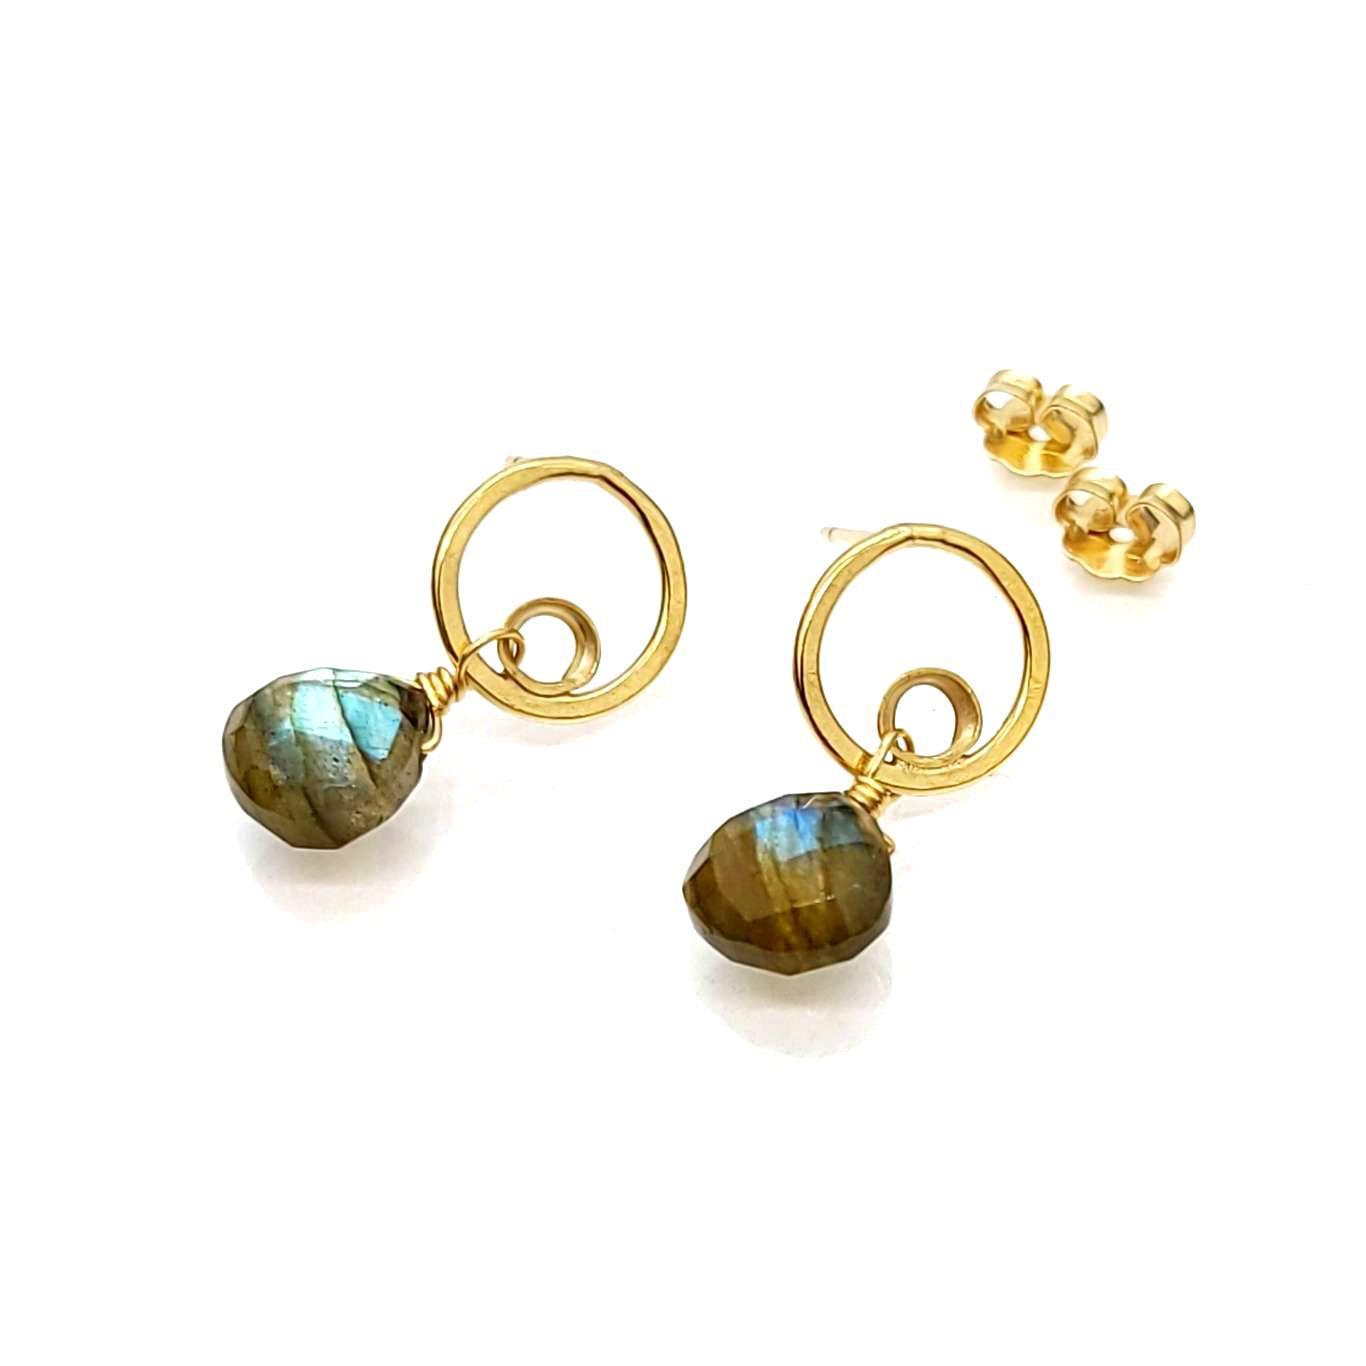 Earrings - 14k Gold Fill Circle Posts with Labradorite by Calliope Jewelry